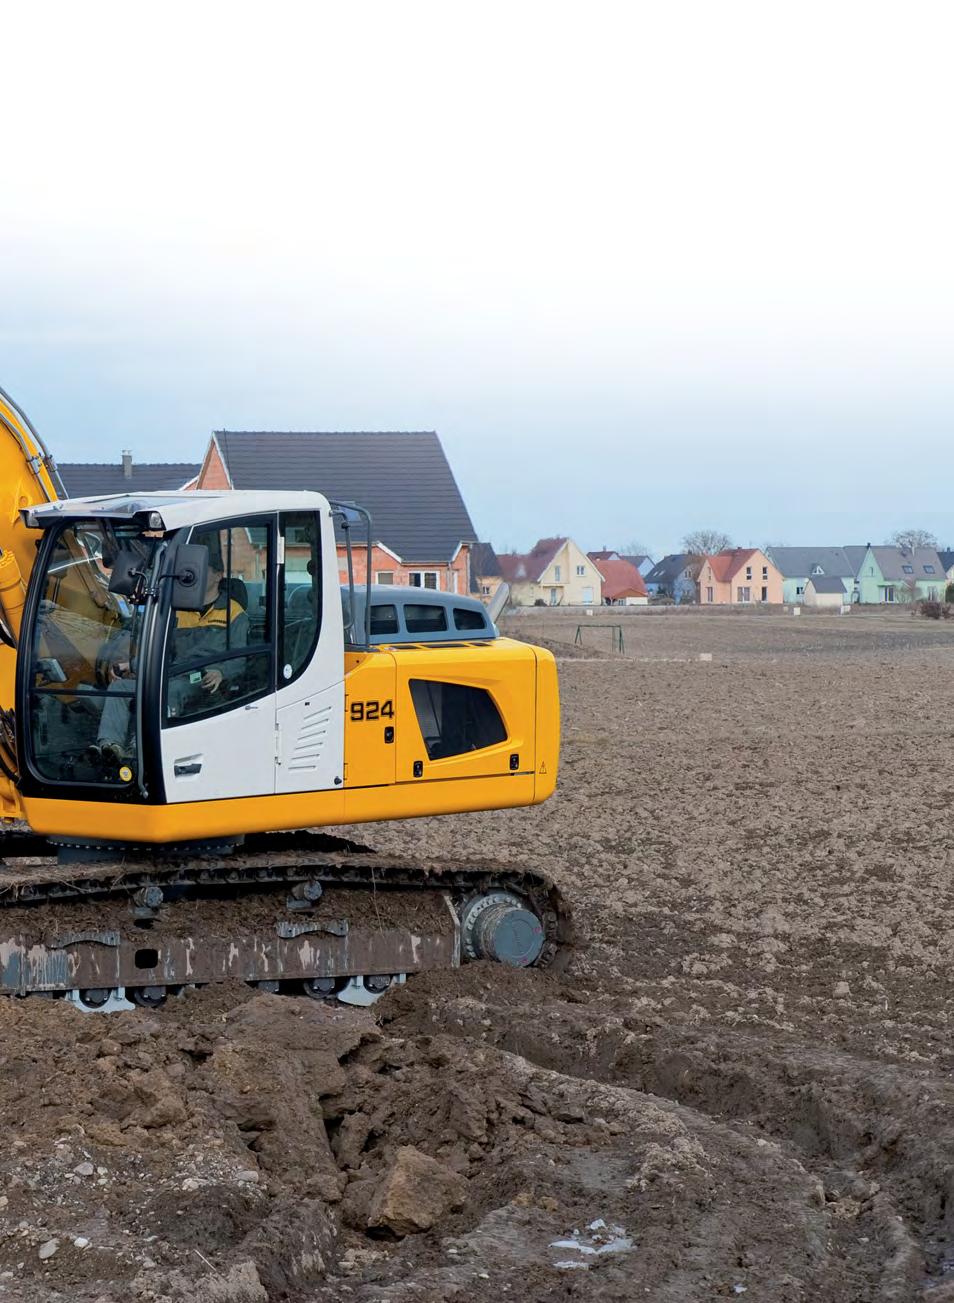 Performance The new R 924 crawler excavator is a high-performance and versatile model.